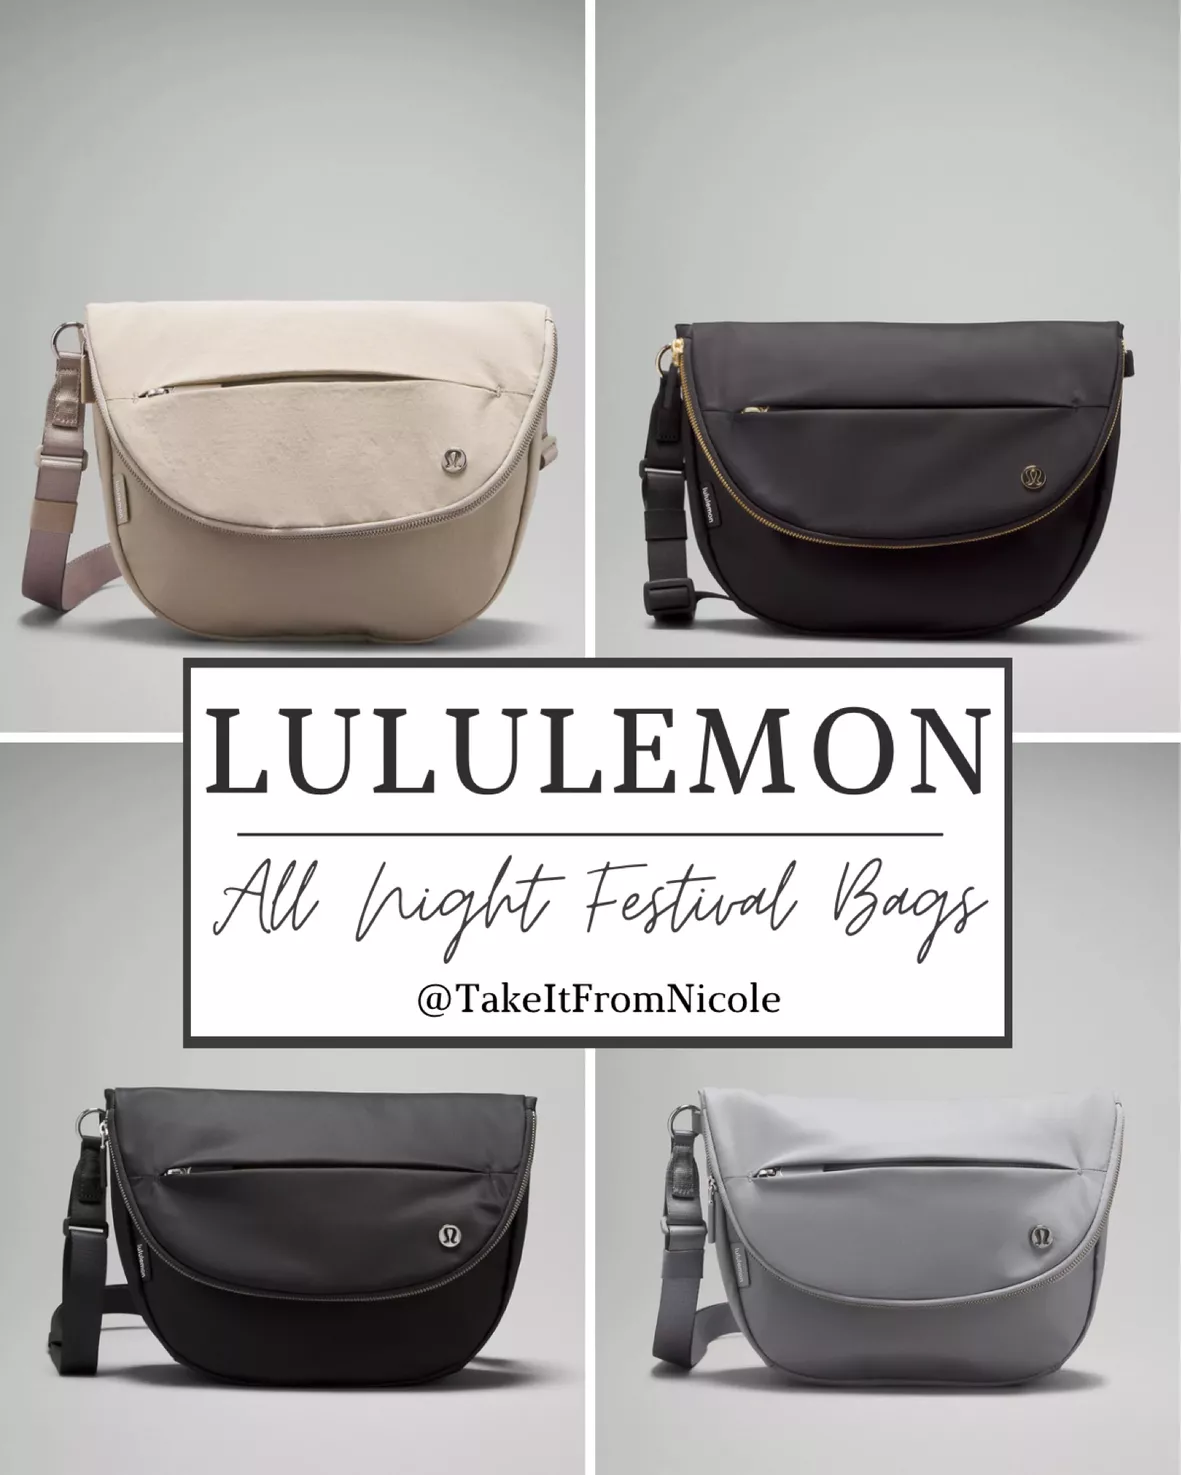 All Night Festival Bag 5L curated on LTK